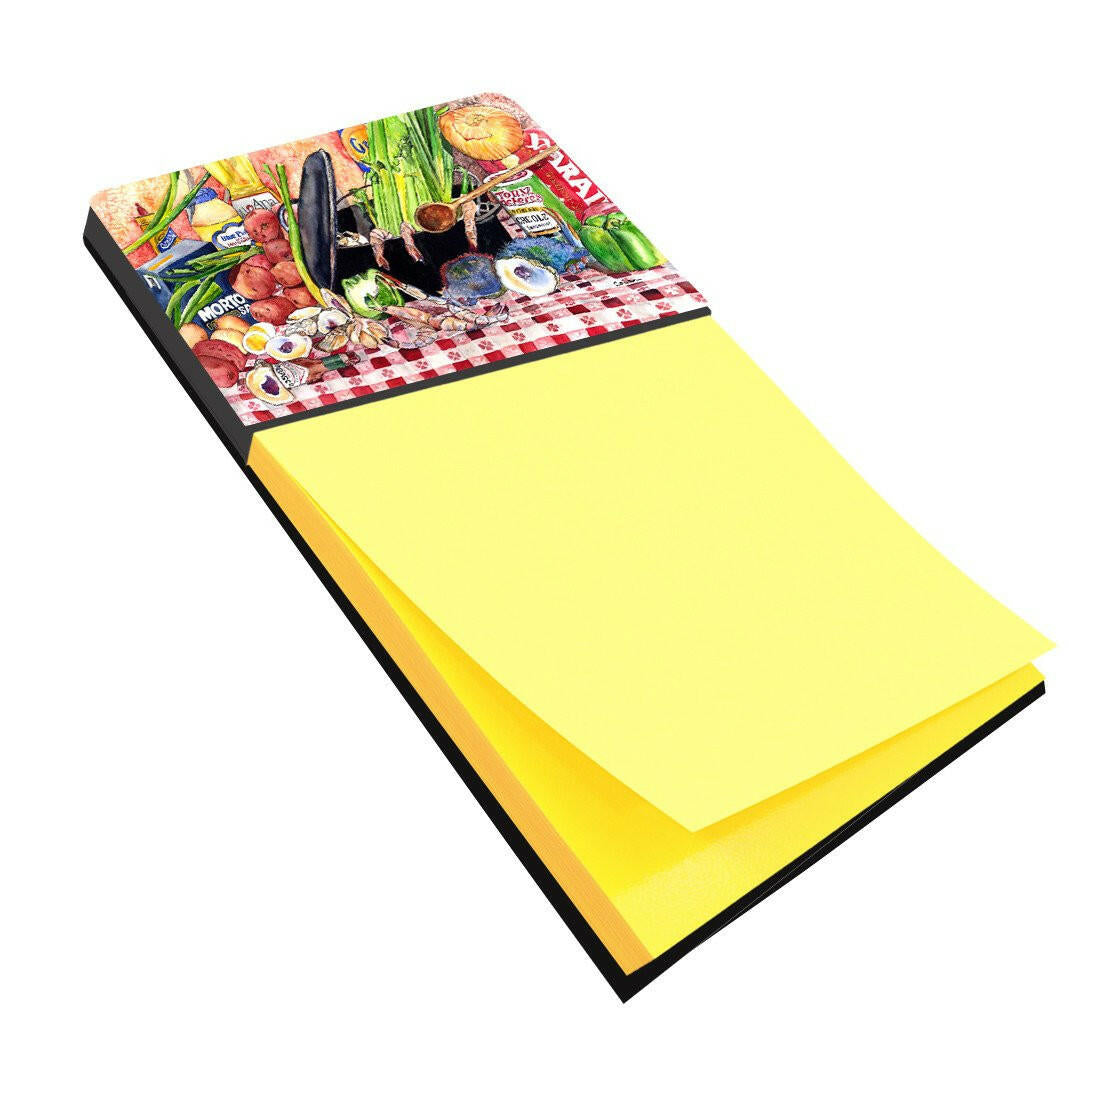 Gumbo and Potato Salad Refiillable Sticky Note Holder or Postit Note Dispenser 8825SN by Caroline's Treasures